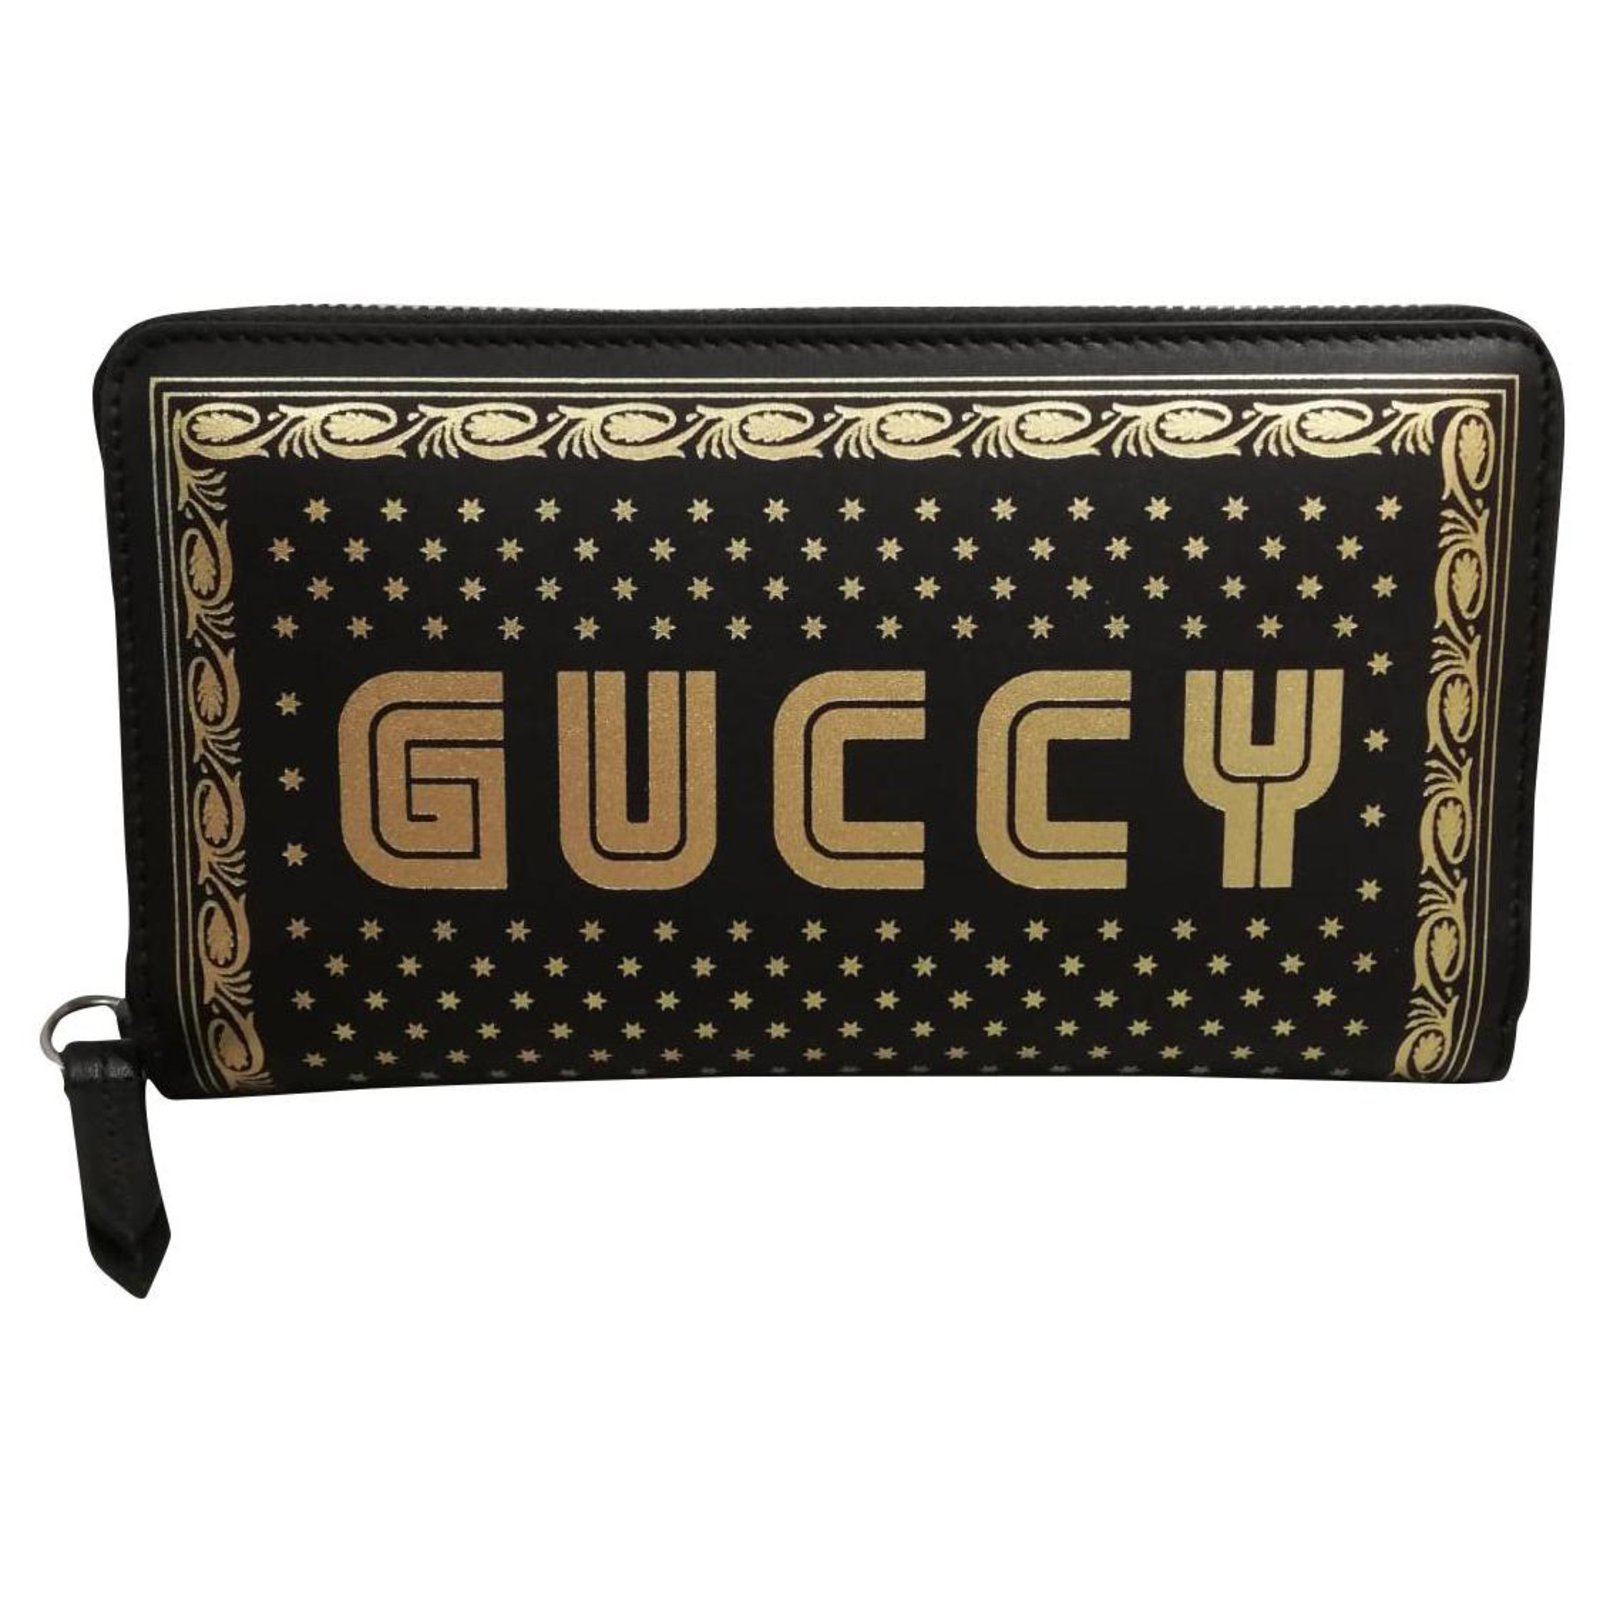 Gucci Gucci leather wallet (Guccy 